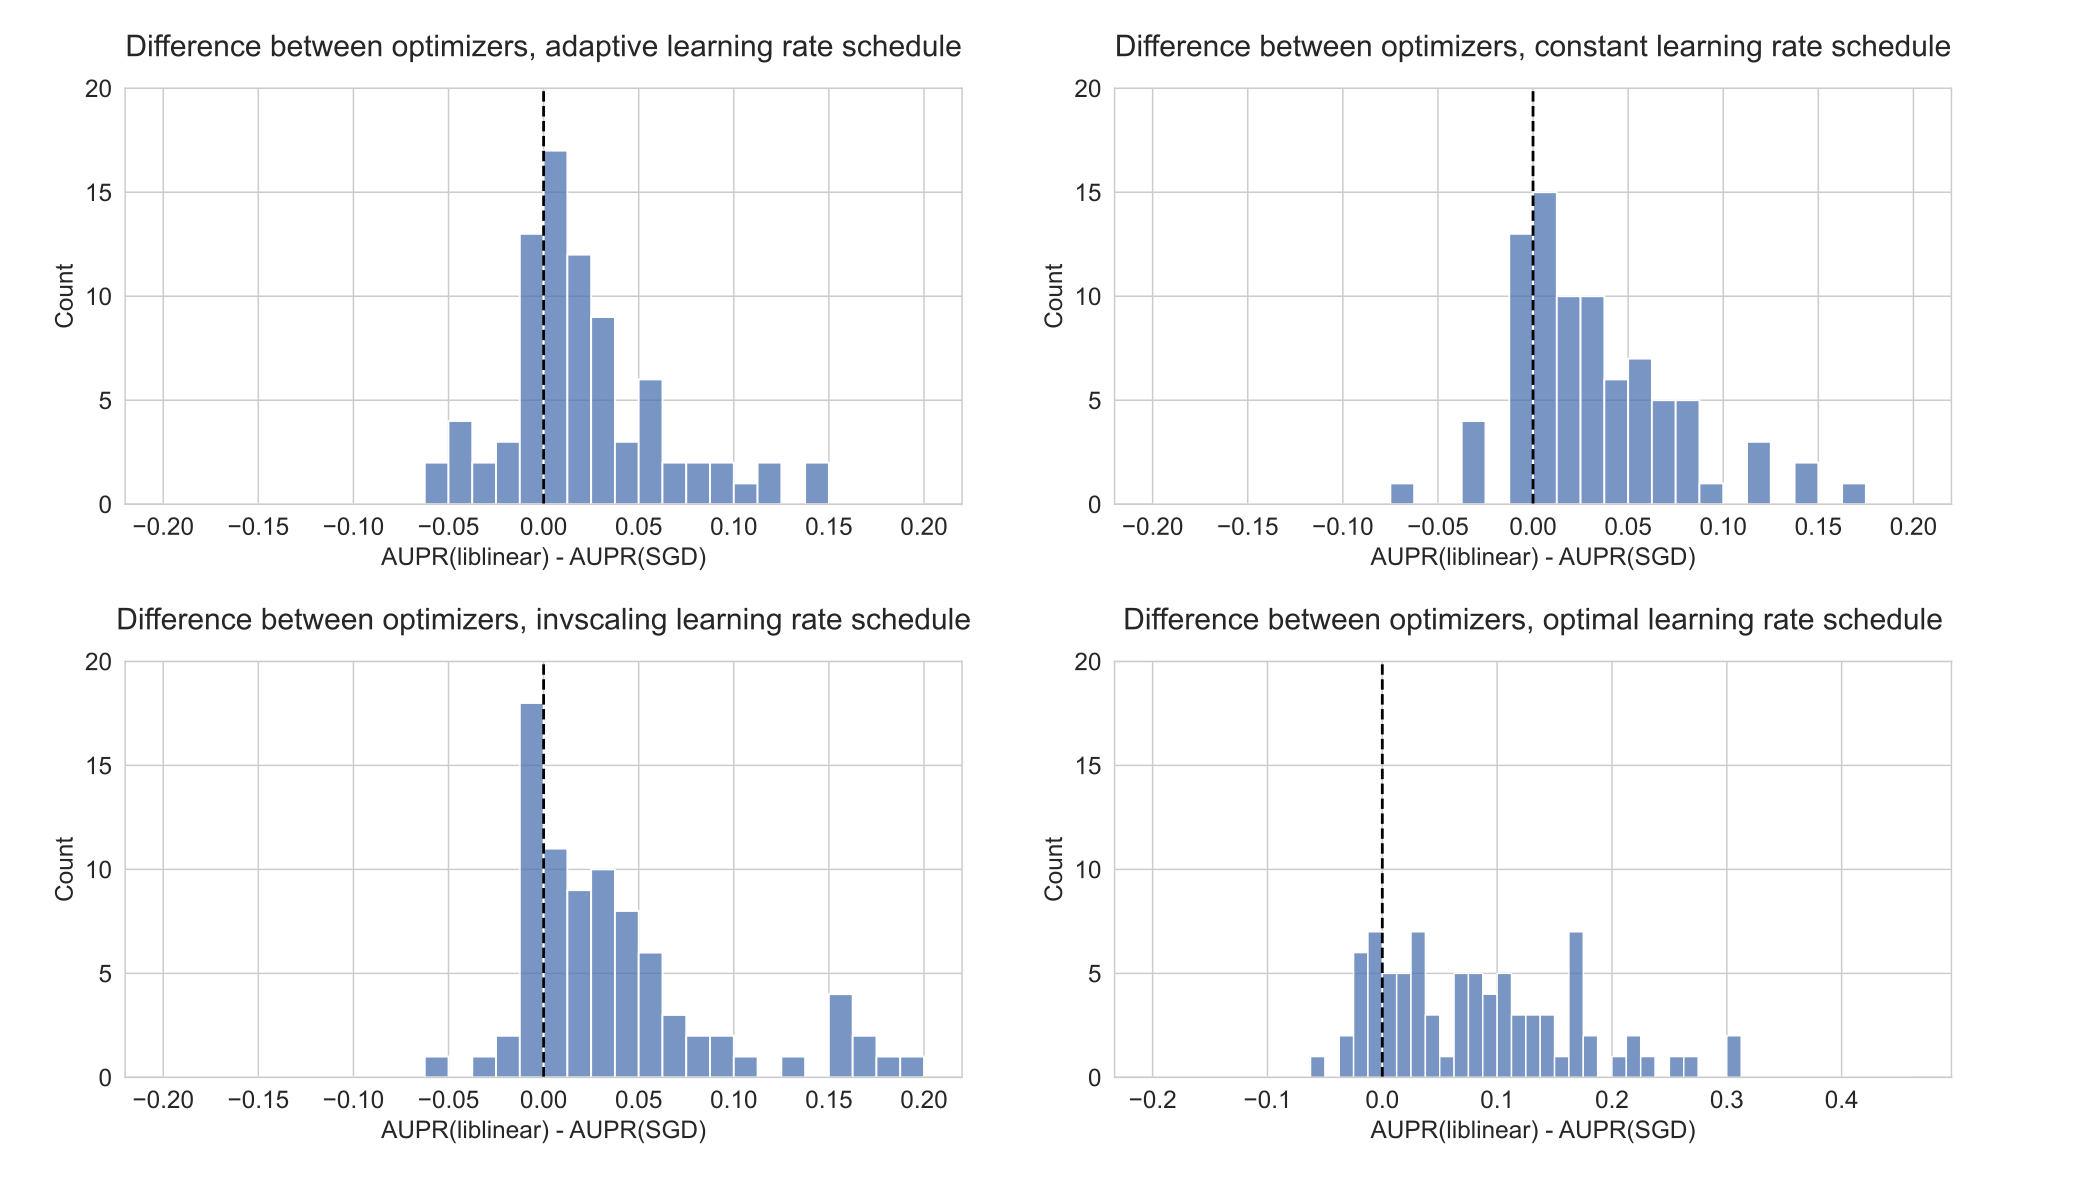 Figure S2: Distribution of performance difference between best-performing model for liblinear and SGD optimizers, across all 84 genes in Vogelstein driver gene set, for varying SGD learning rate schedulers. Positive numbers on the x-axis indicate better performance using liblinear, and negative numbers indicate better performance using SGD.